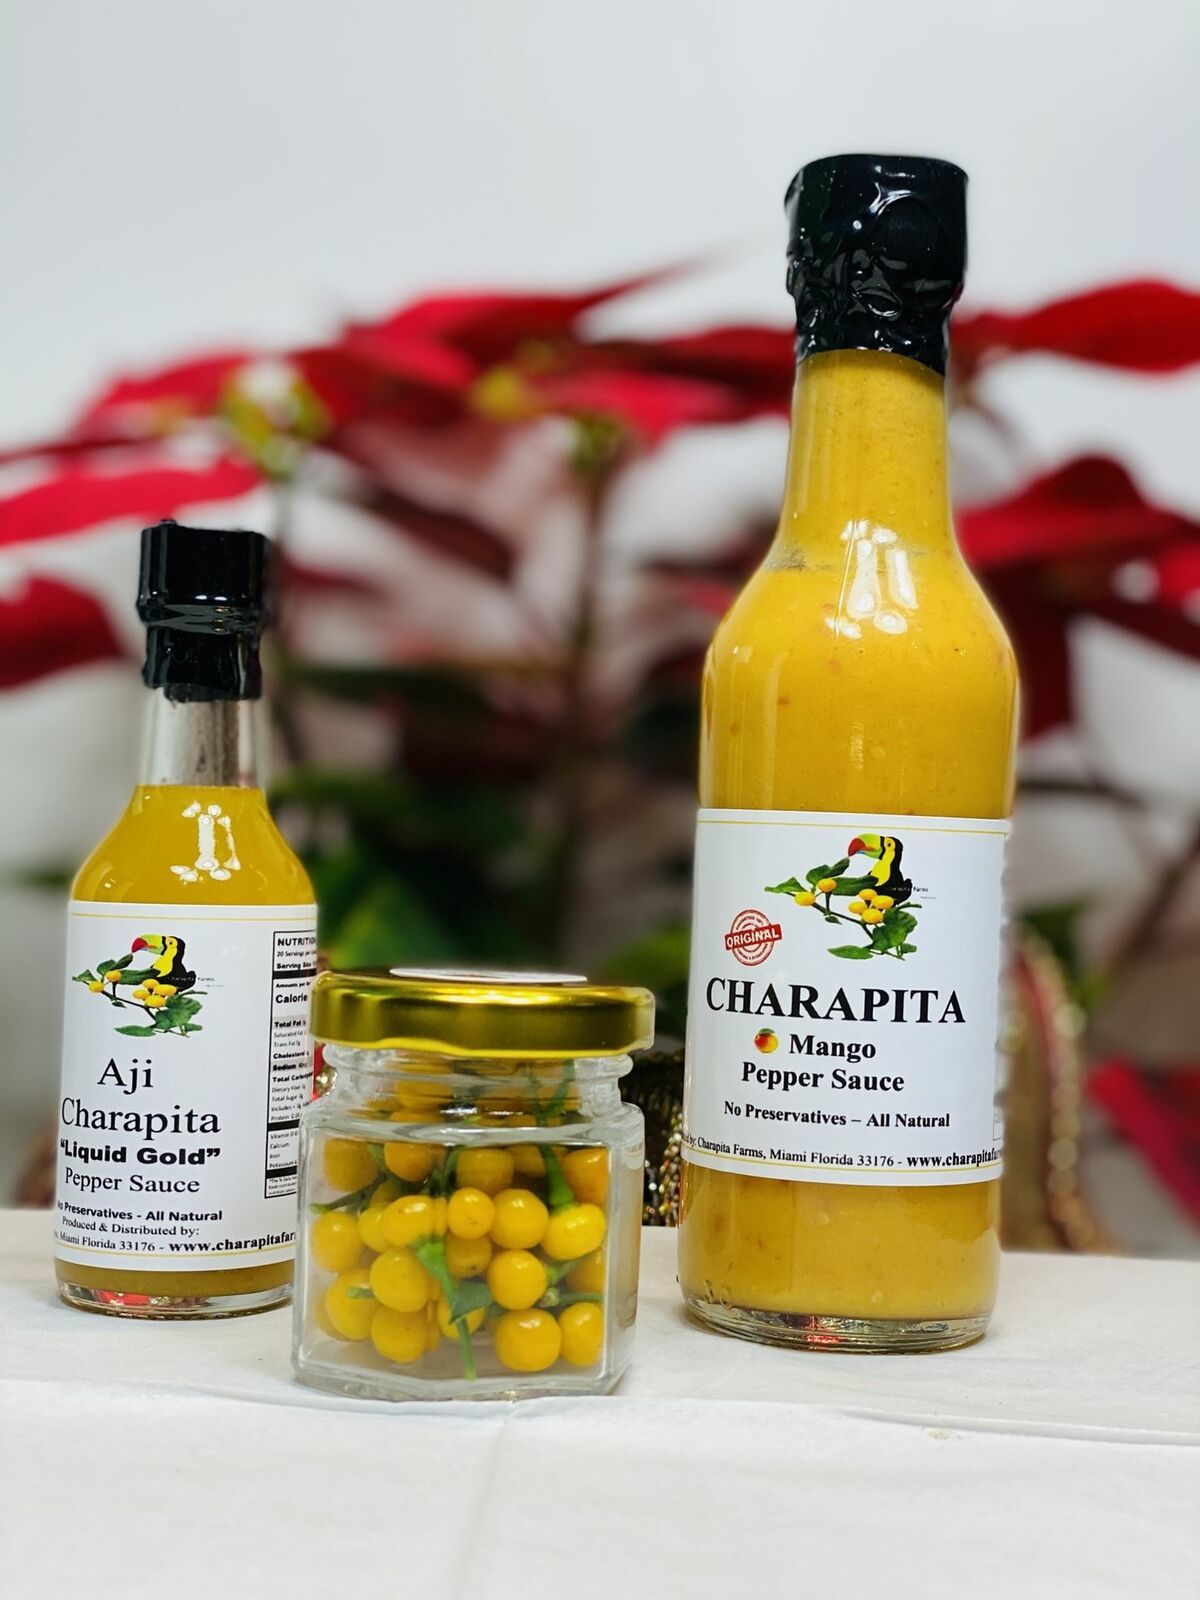 Aji Charapita Gift Set with or without apron - $37.62 - $74.25